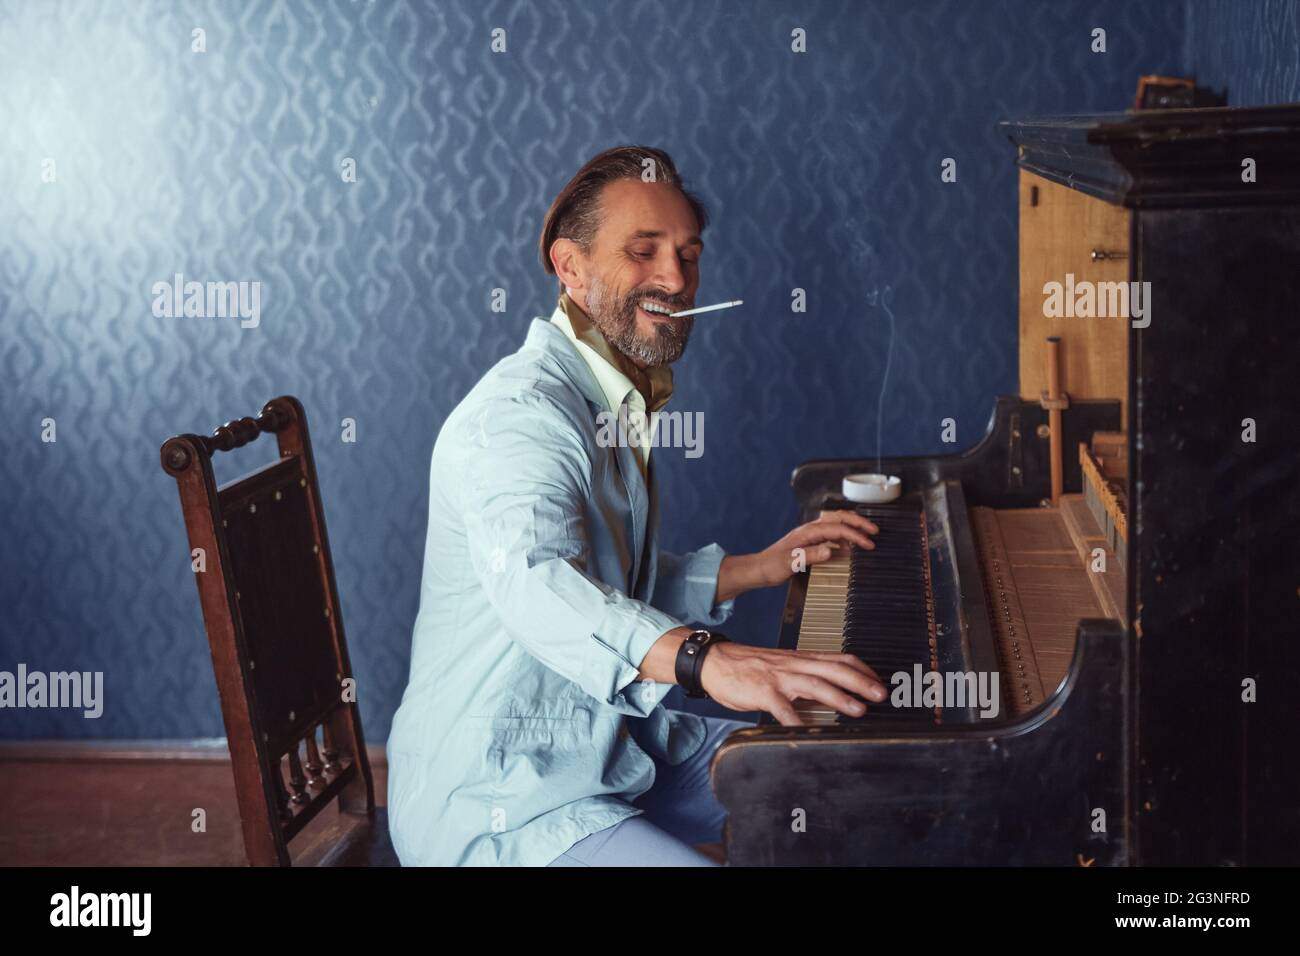 Brutal Man With a Beard 40 Years Old Plays the Old Piano. Stock Photo